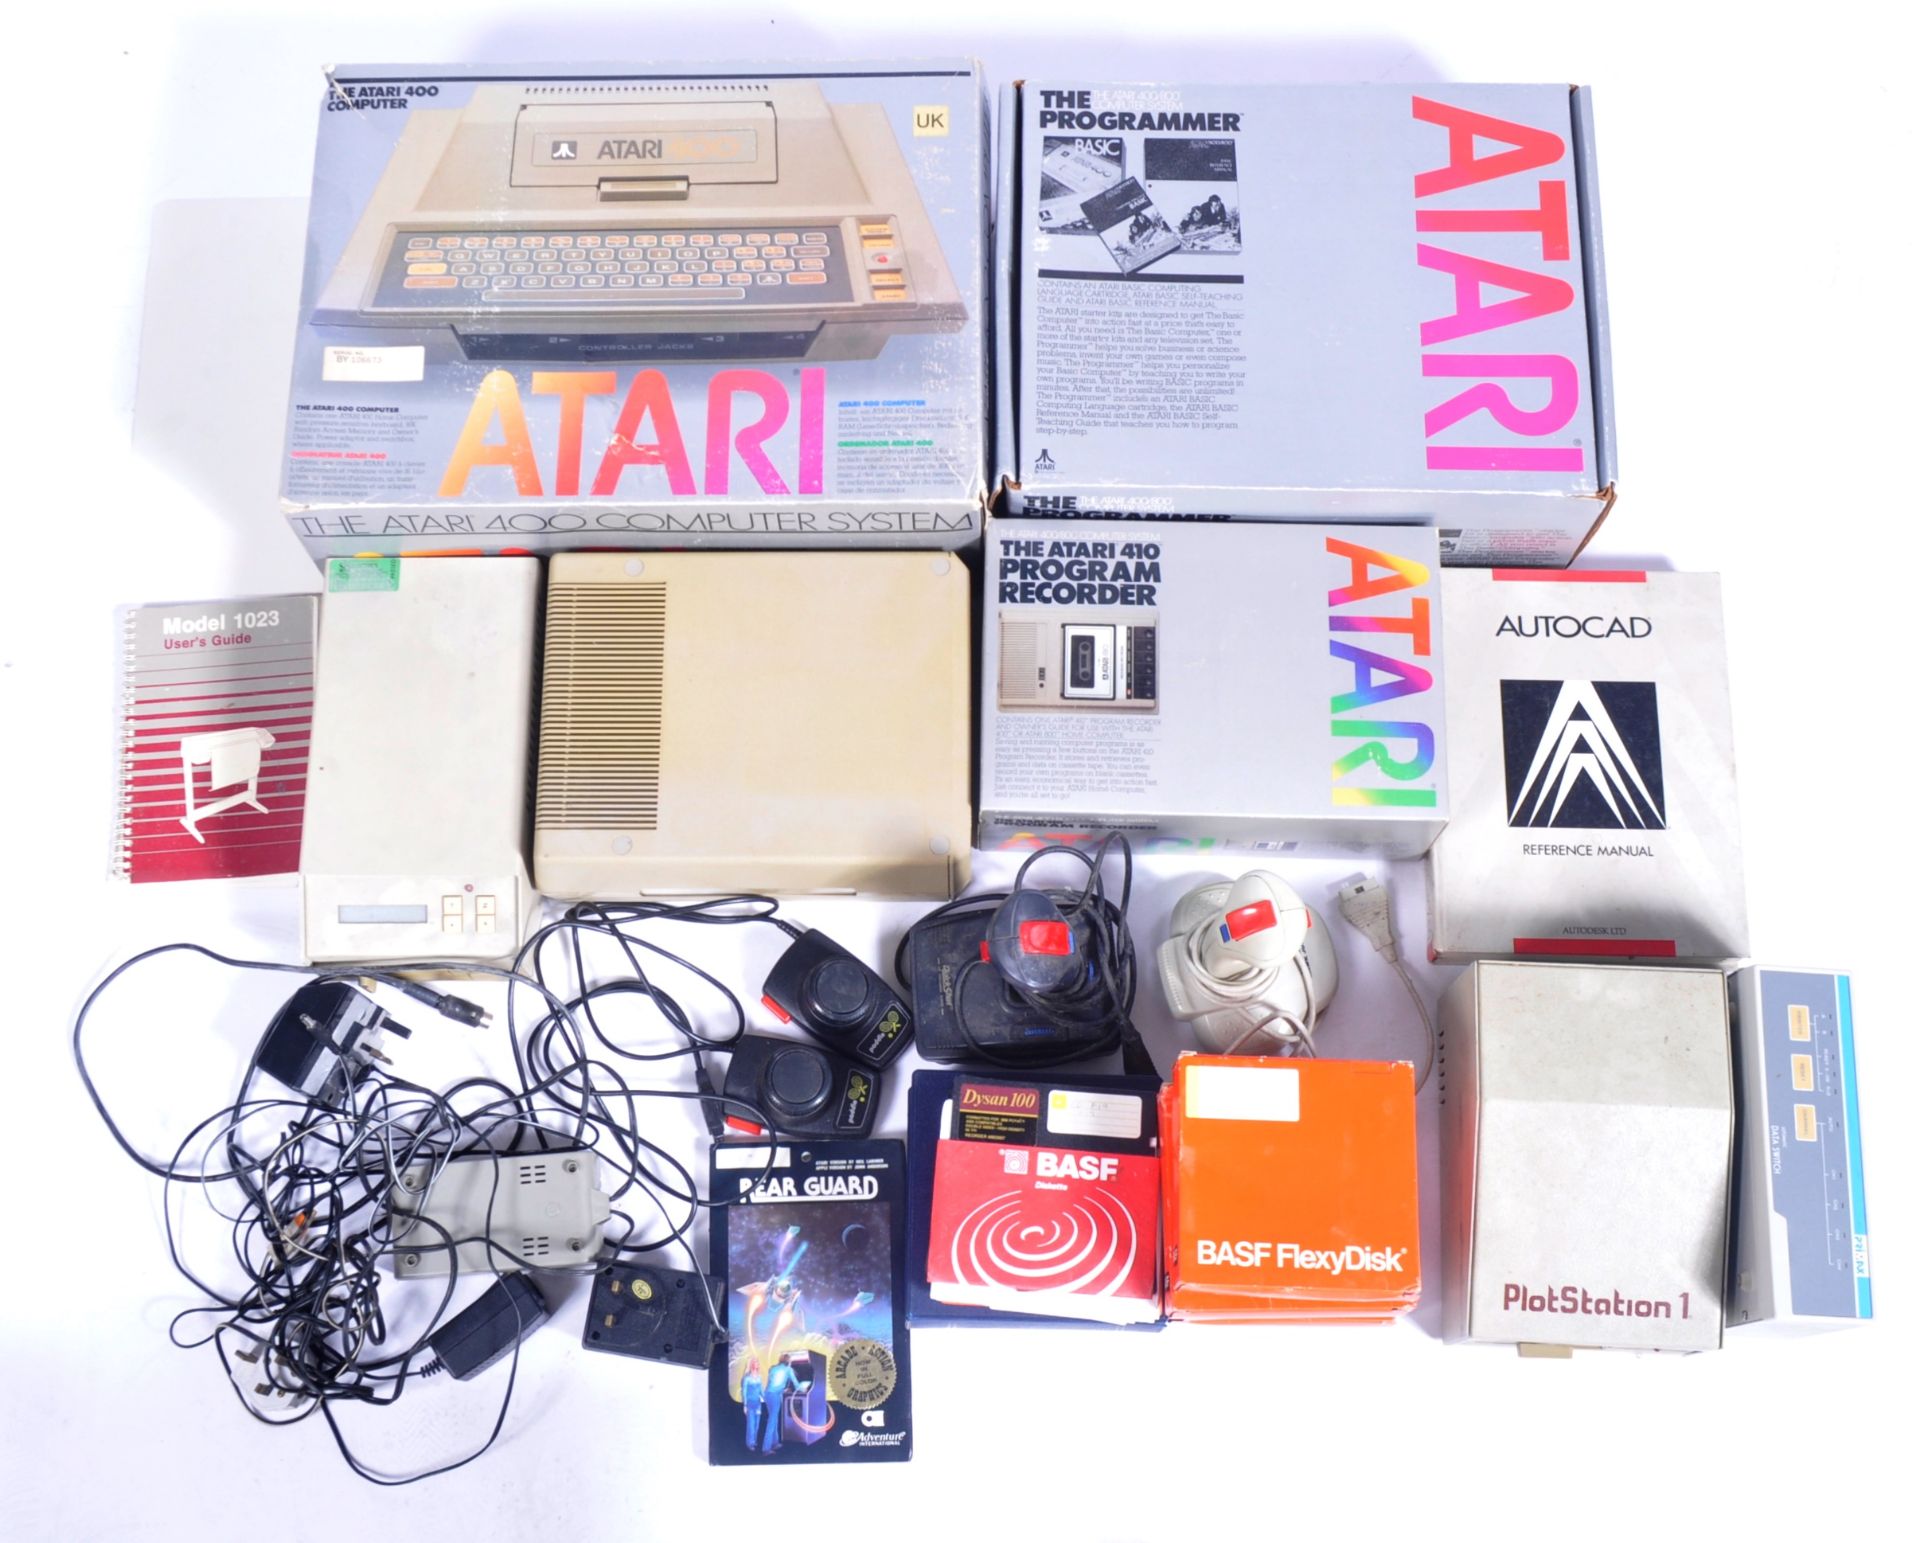 COLLECTION OF VINTAGE ATARI GAMING ALONG WITH A PLOT STATION 1